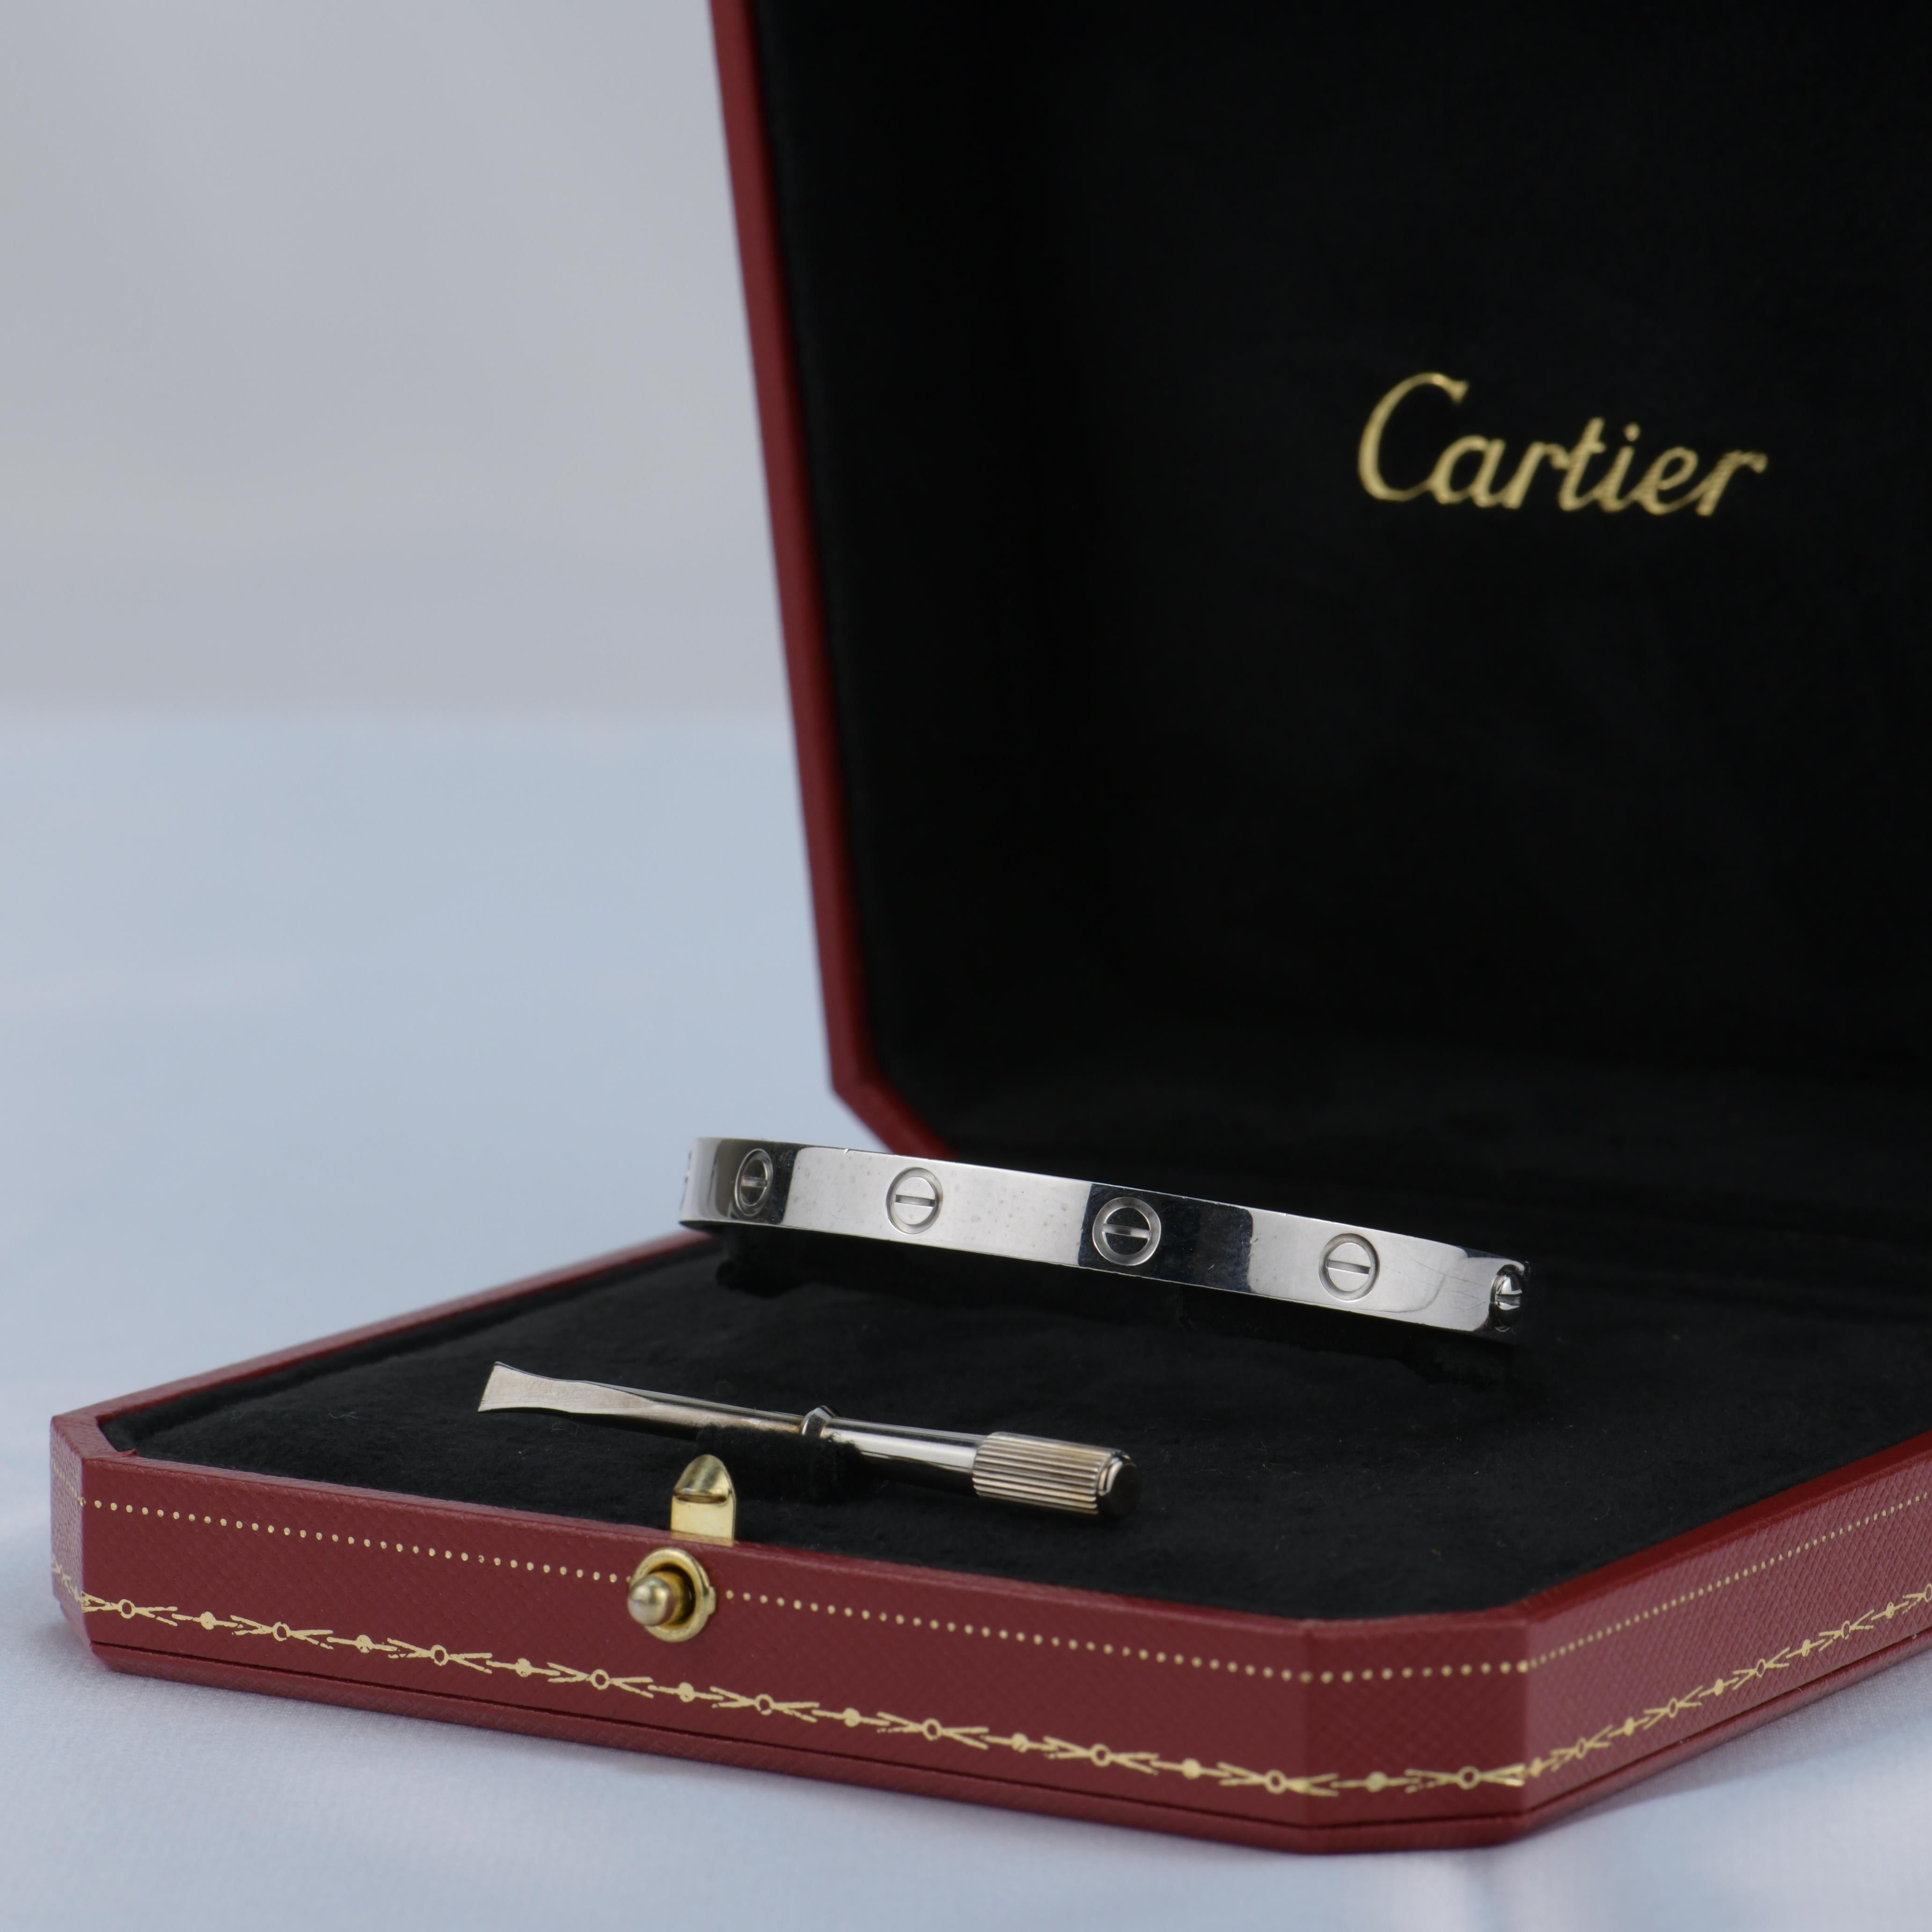 Cartier 18k White Gold Love Bracelet with Box and Card 3